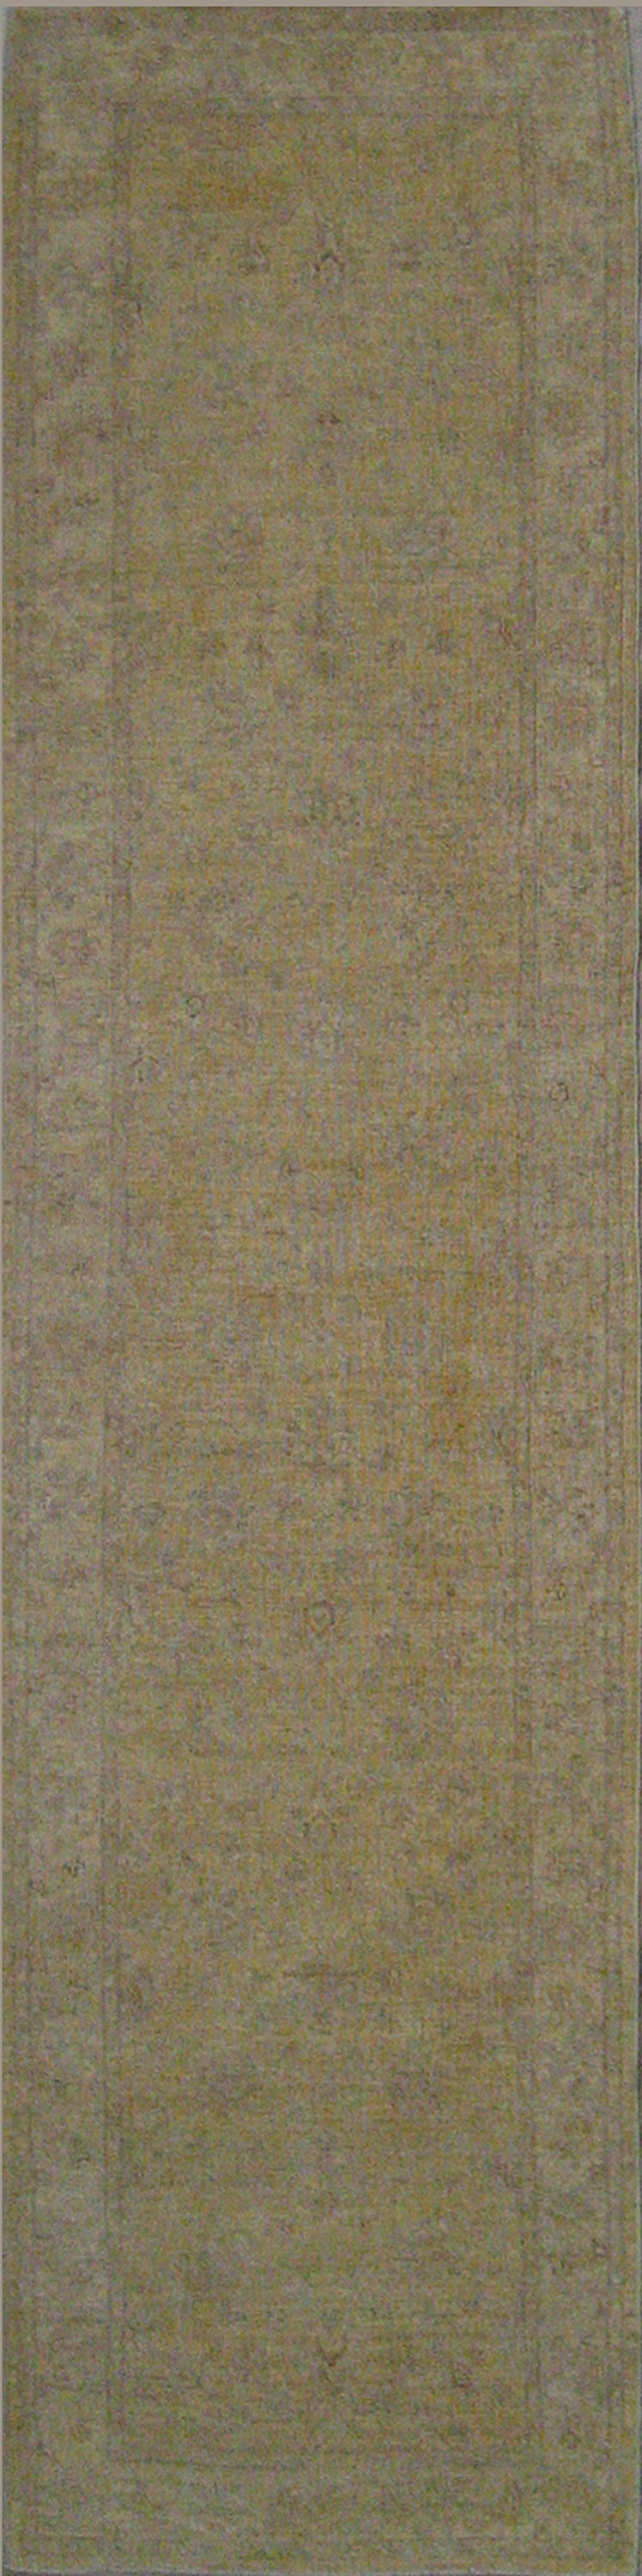 3x12 Soft Yellow Gold Agra Design Ariana Traditional Runner Rug